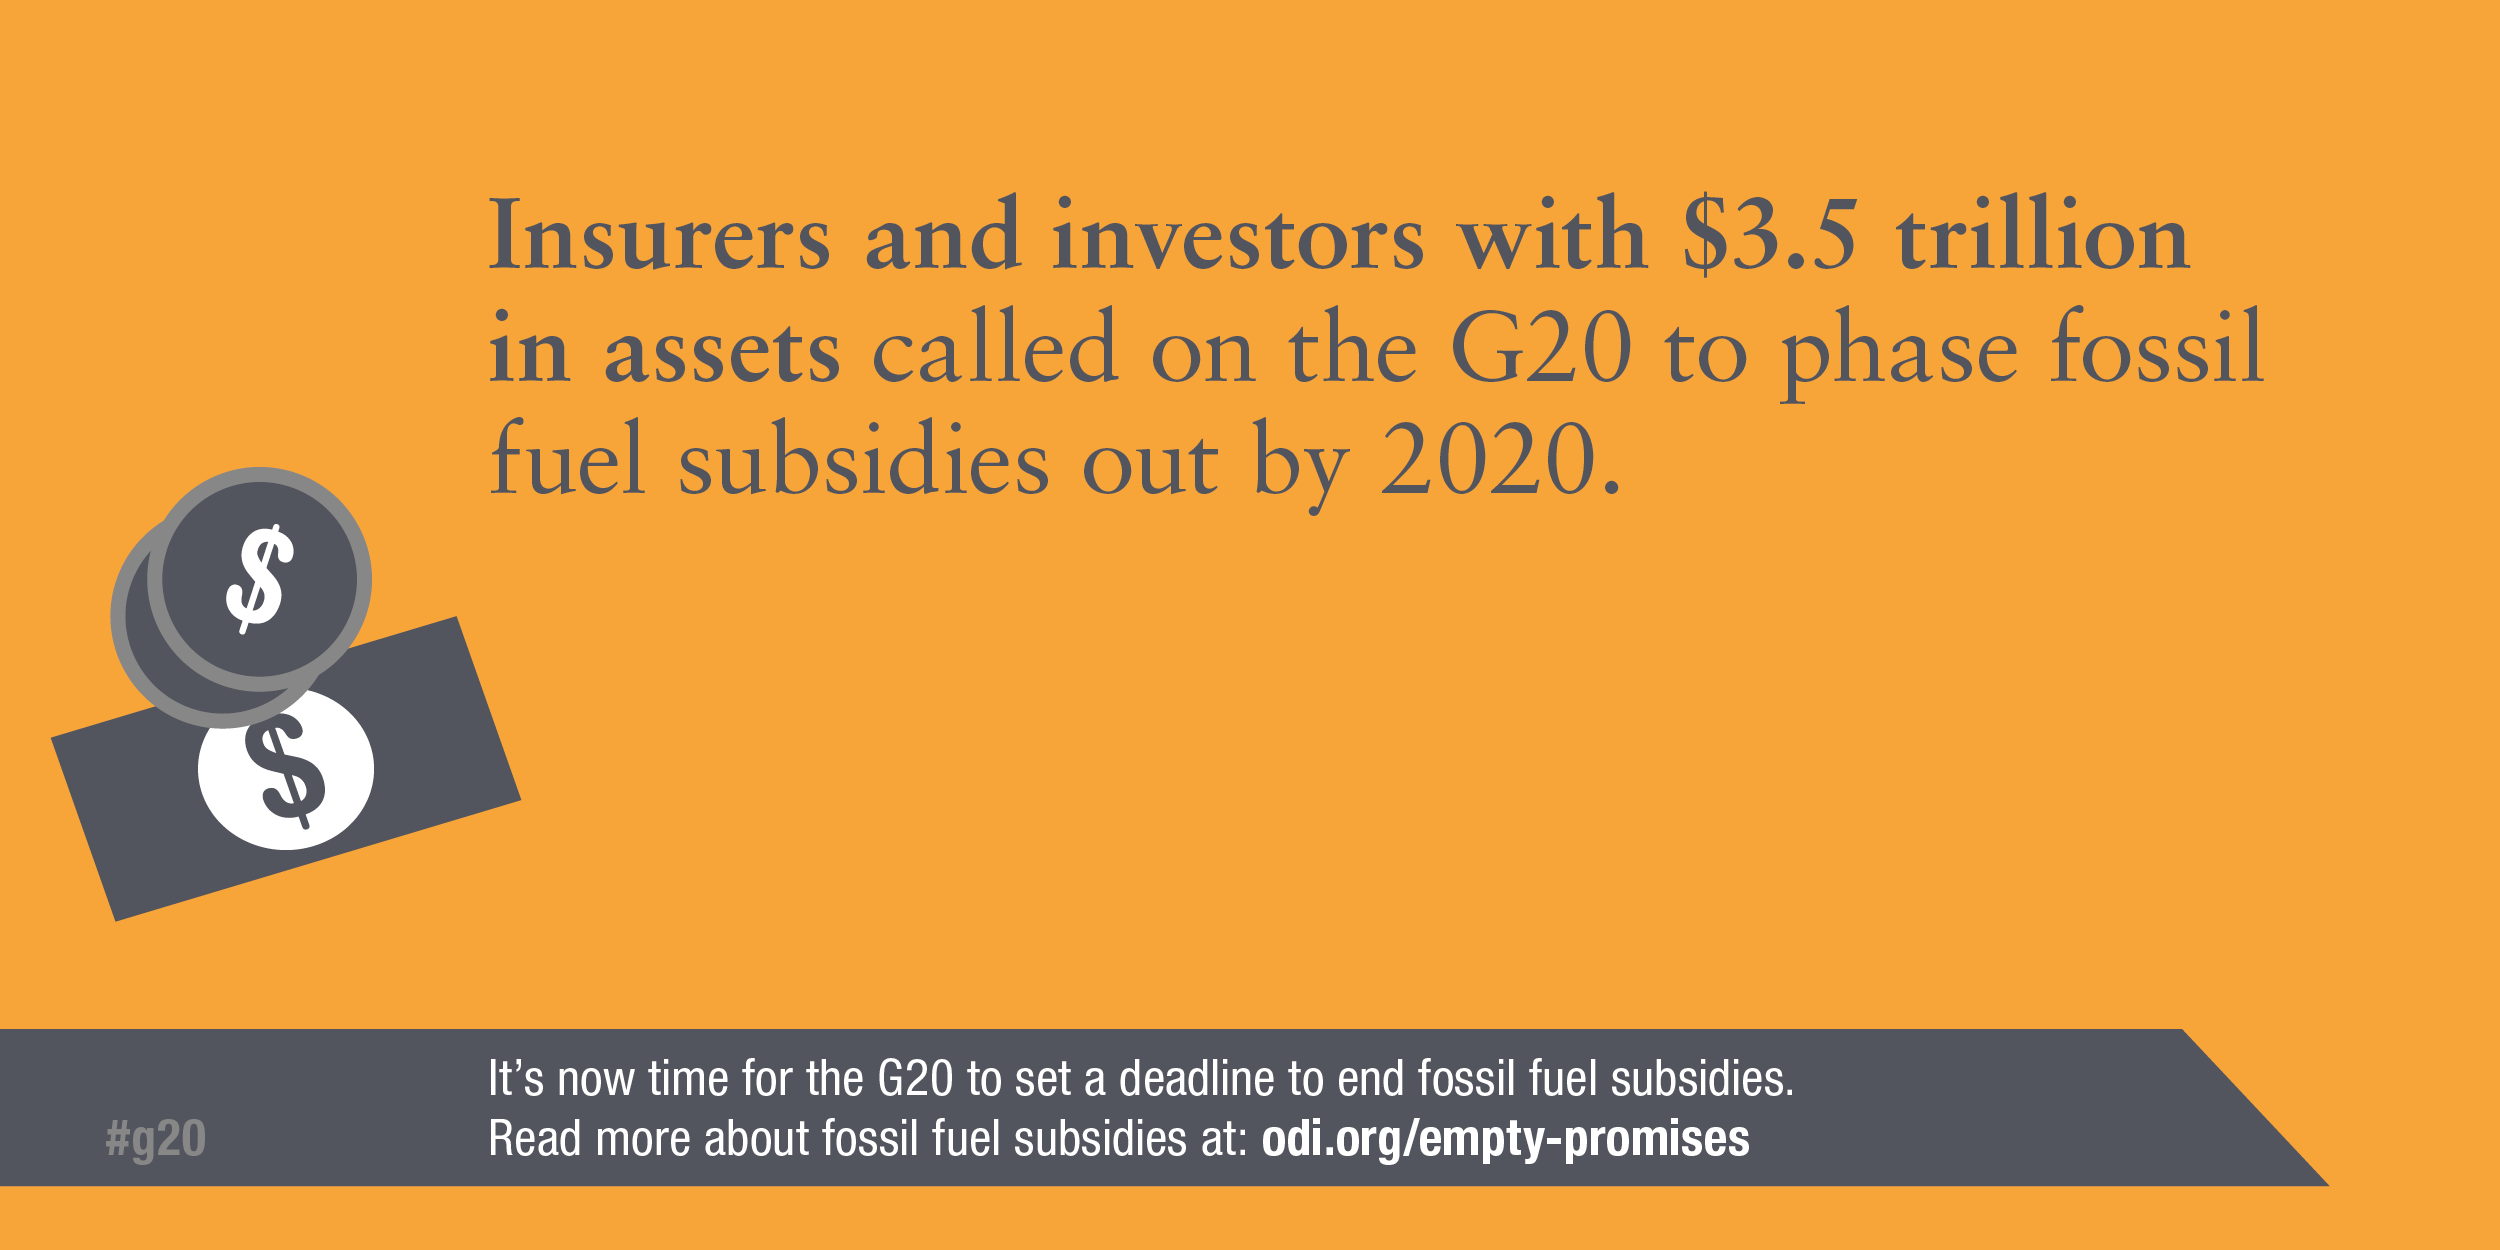 Infographic: Insurers and investors with $3.5 trillion in assets called on the G20 to phase out fossil fuel subsidies by 2020